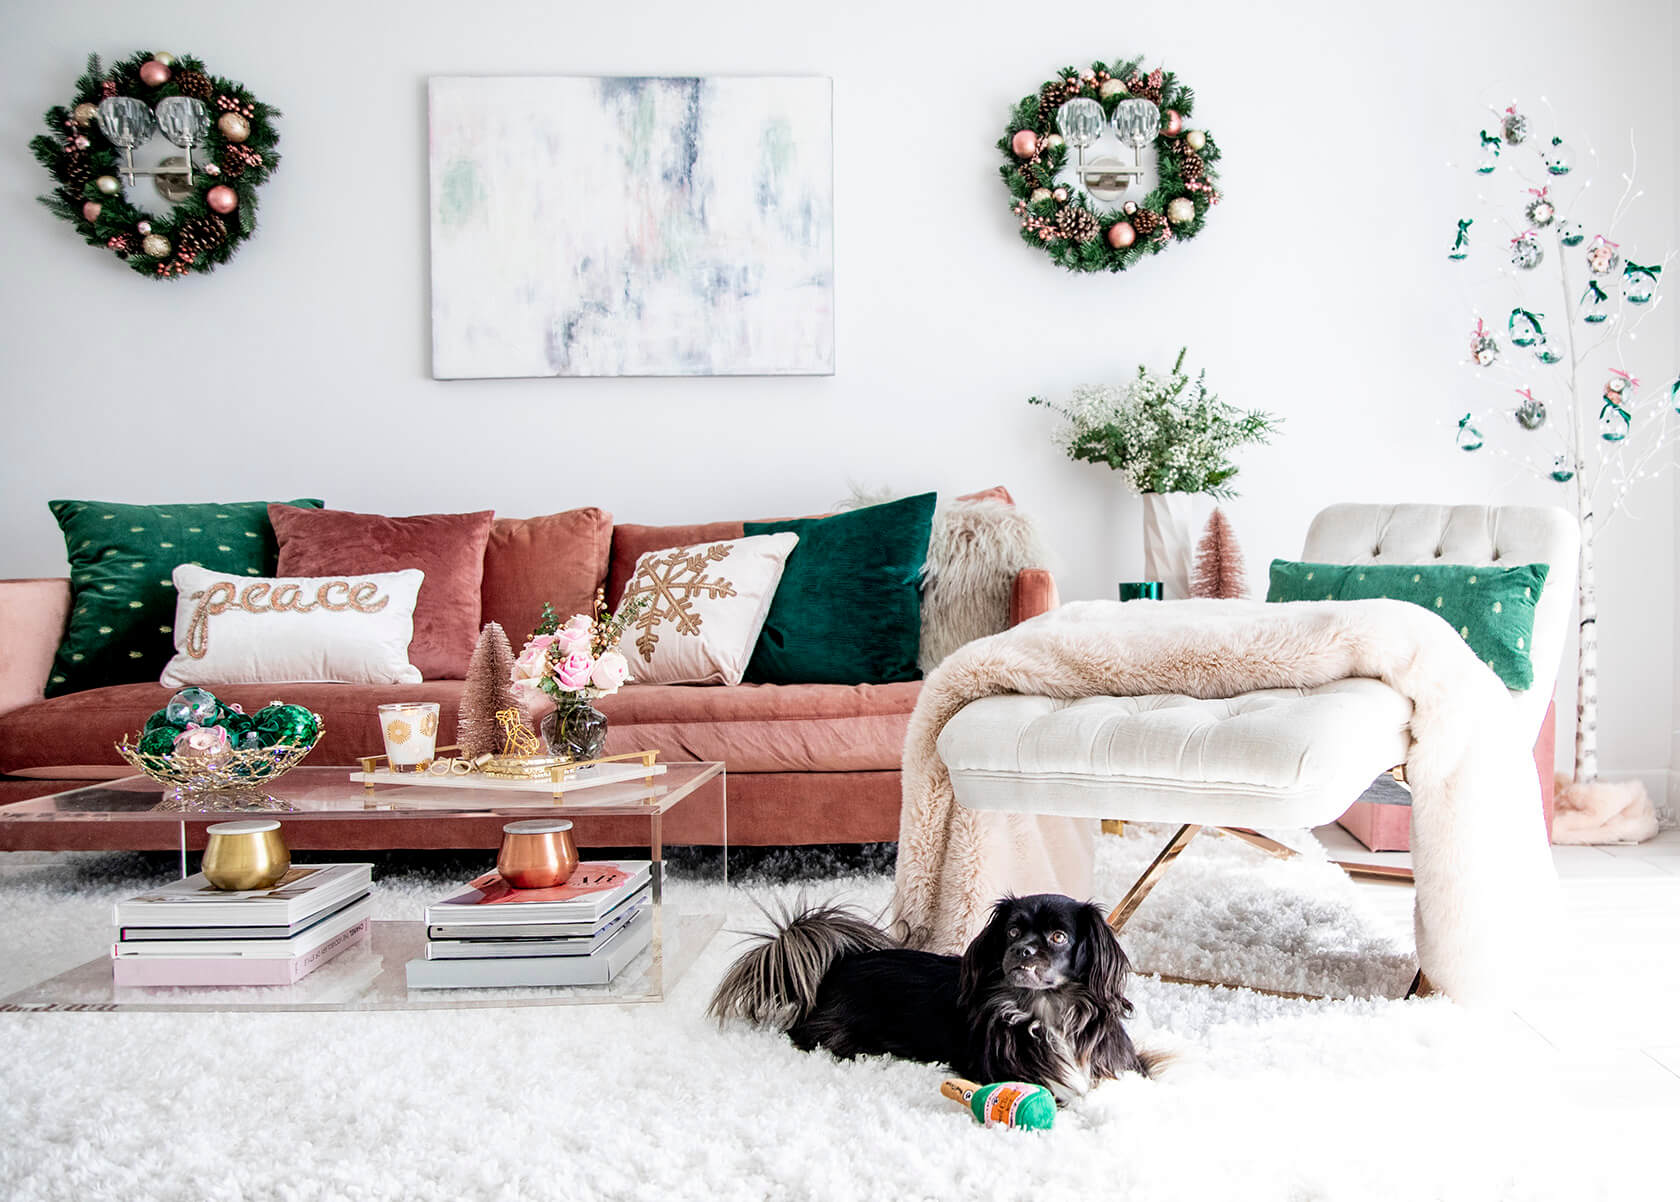 Sydne Style Shows Glam Holiday Decor Ideas With Green Velvet And Blush Couch Sydne Style